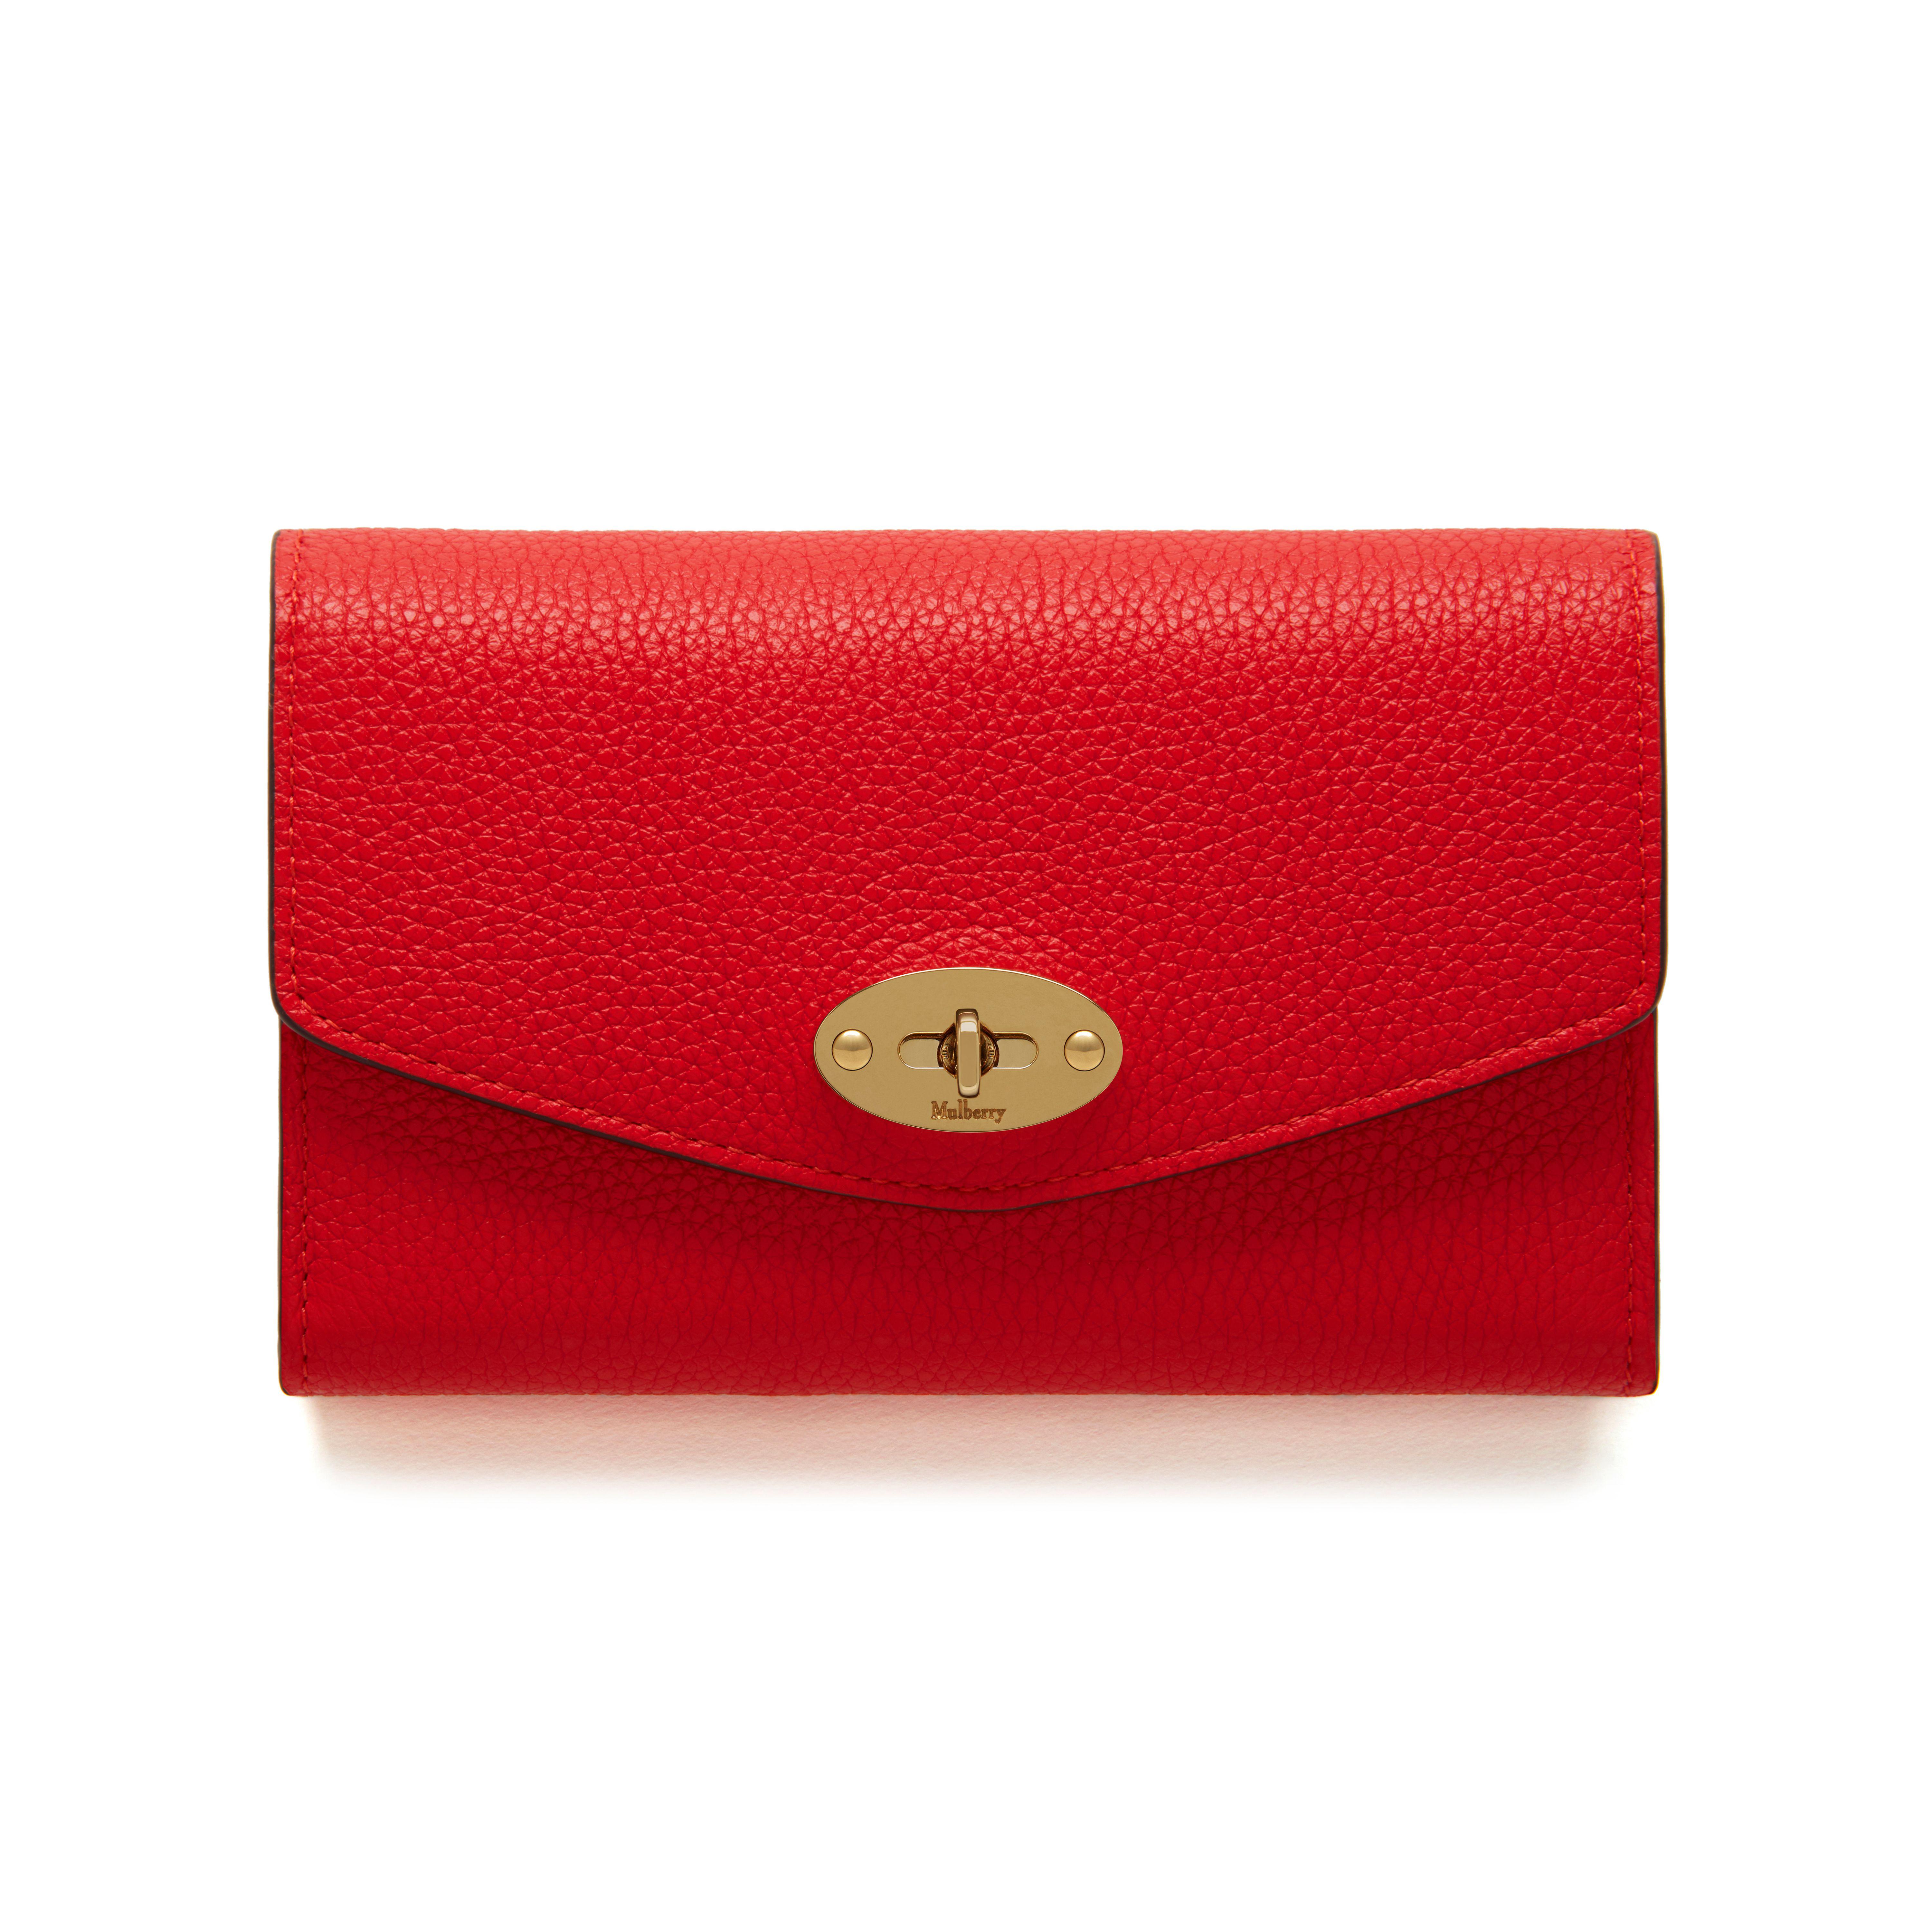 Mulberry Leather Medium Darley Wallet in Red - Lyst